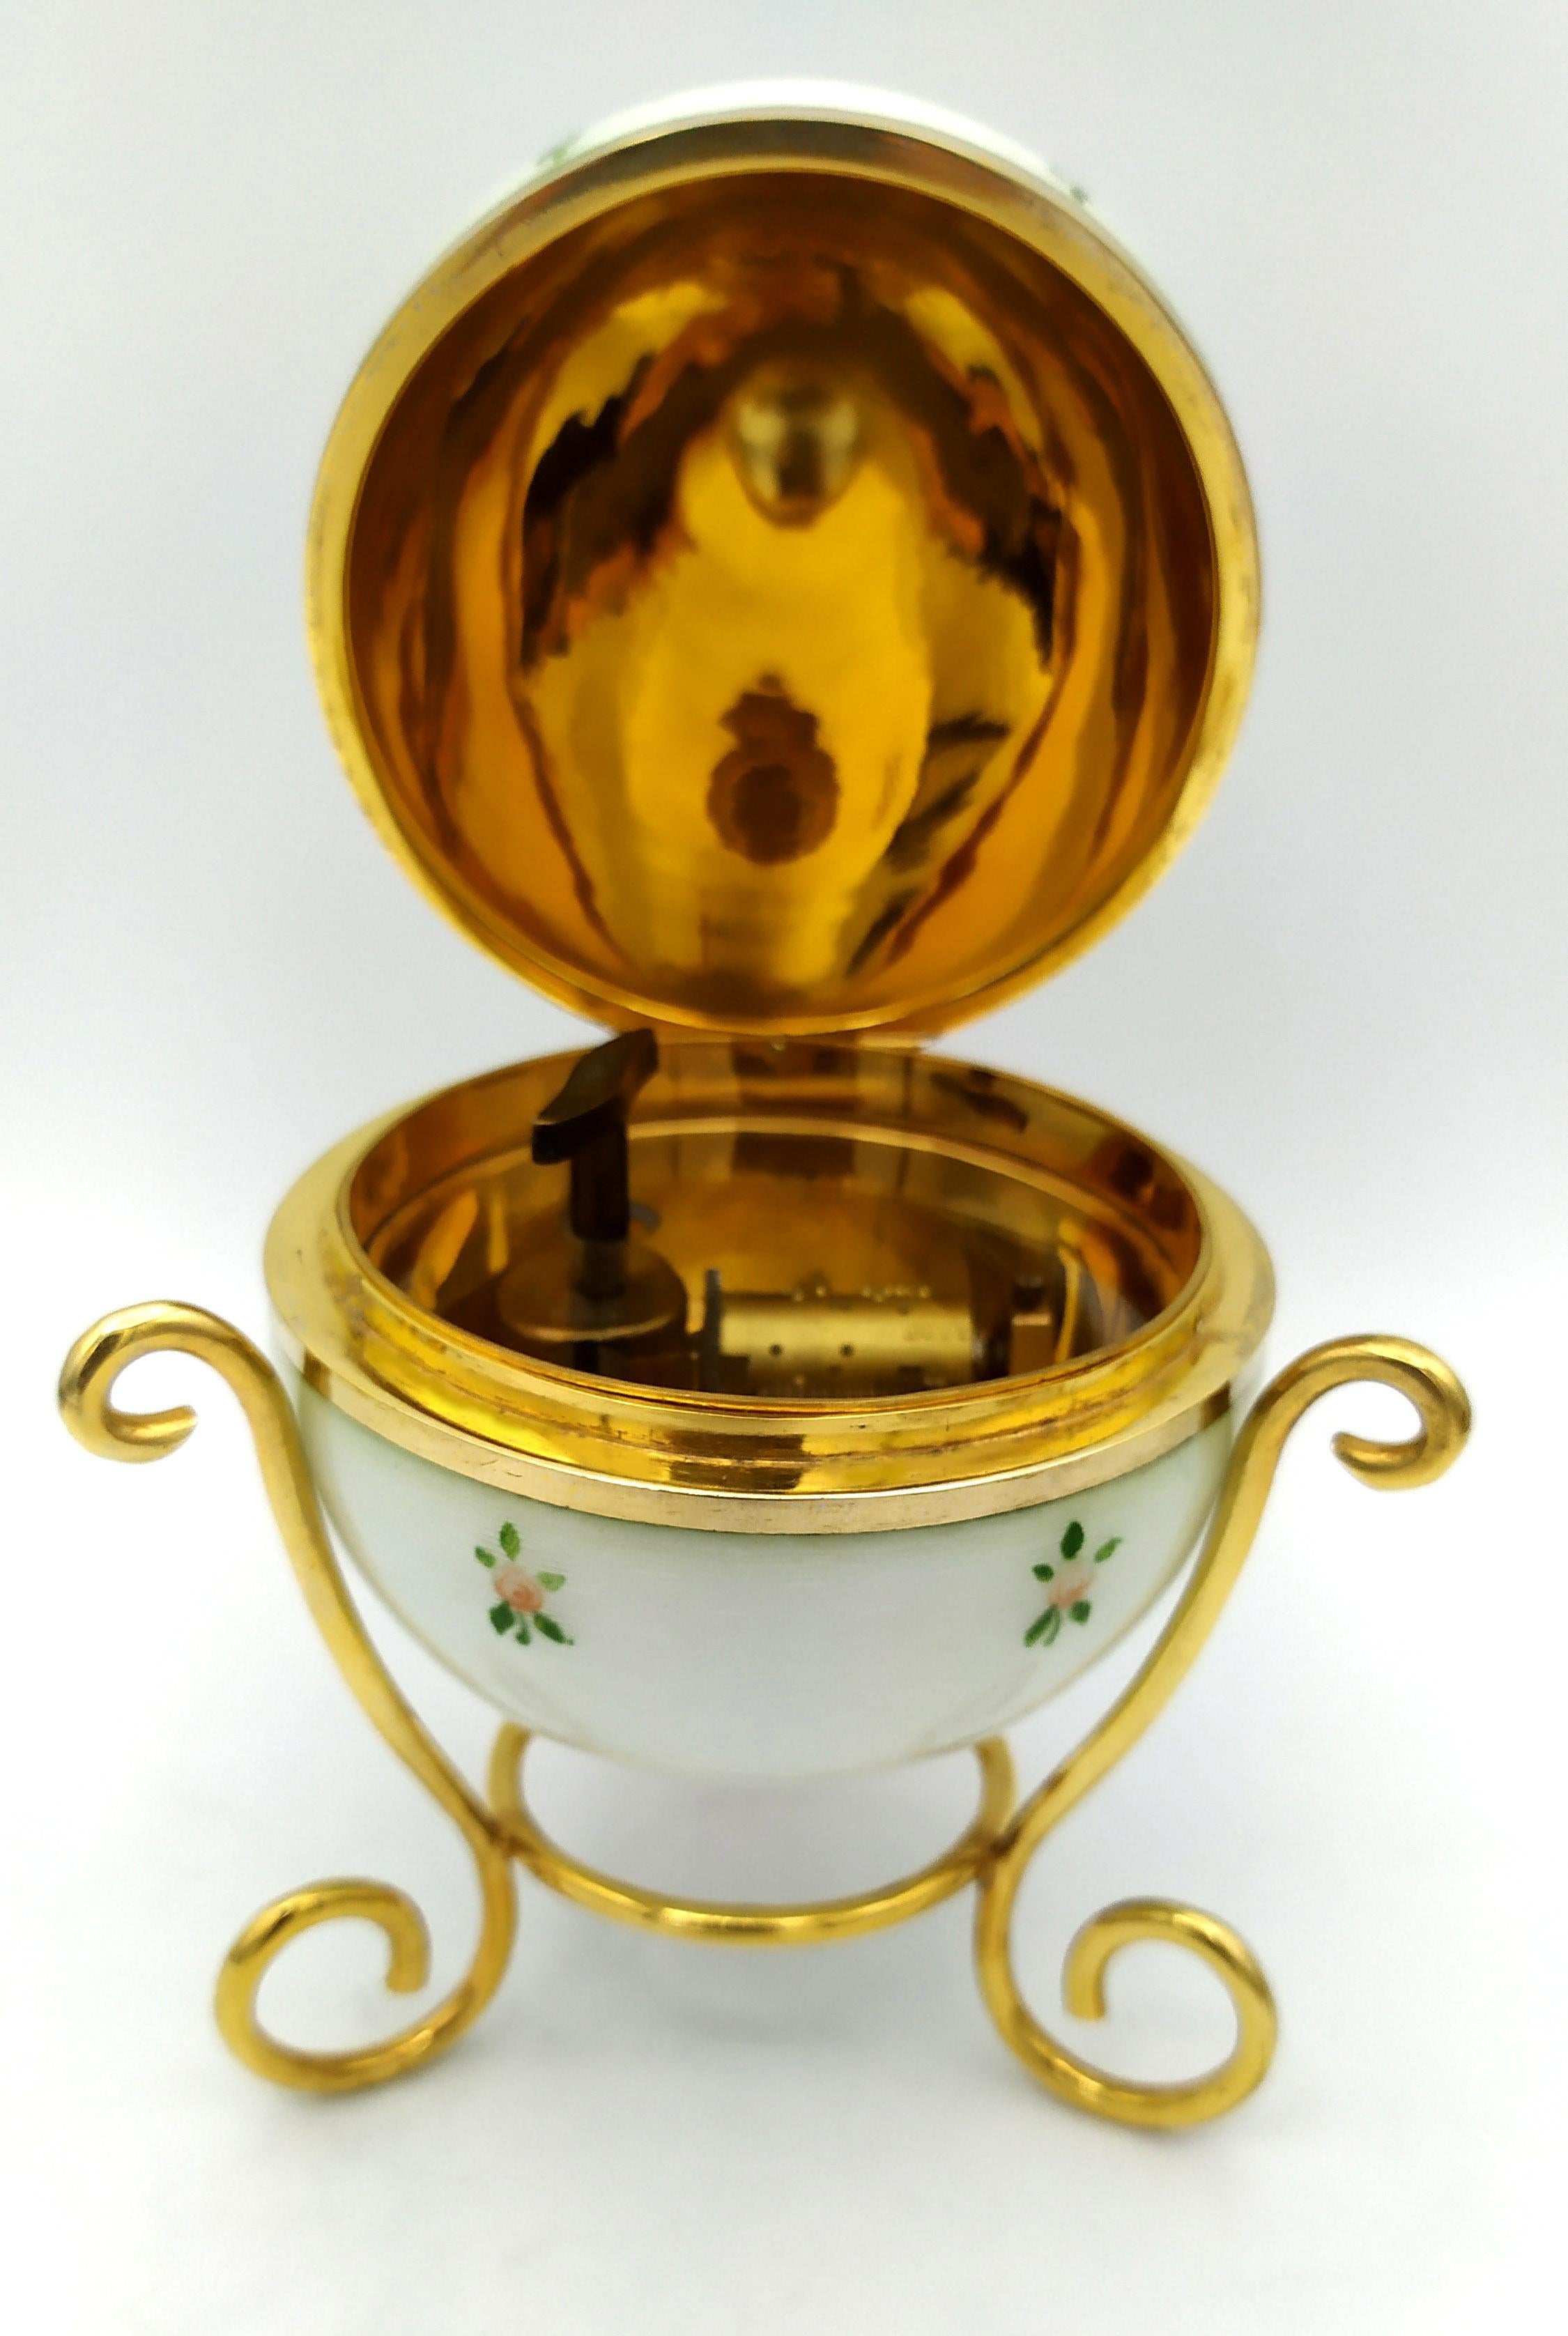 Plated Egg “music box” mechanism by the Swiss Maison Reuge Sterling Silver Salimbeni  For Sale